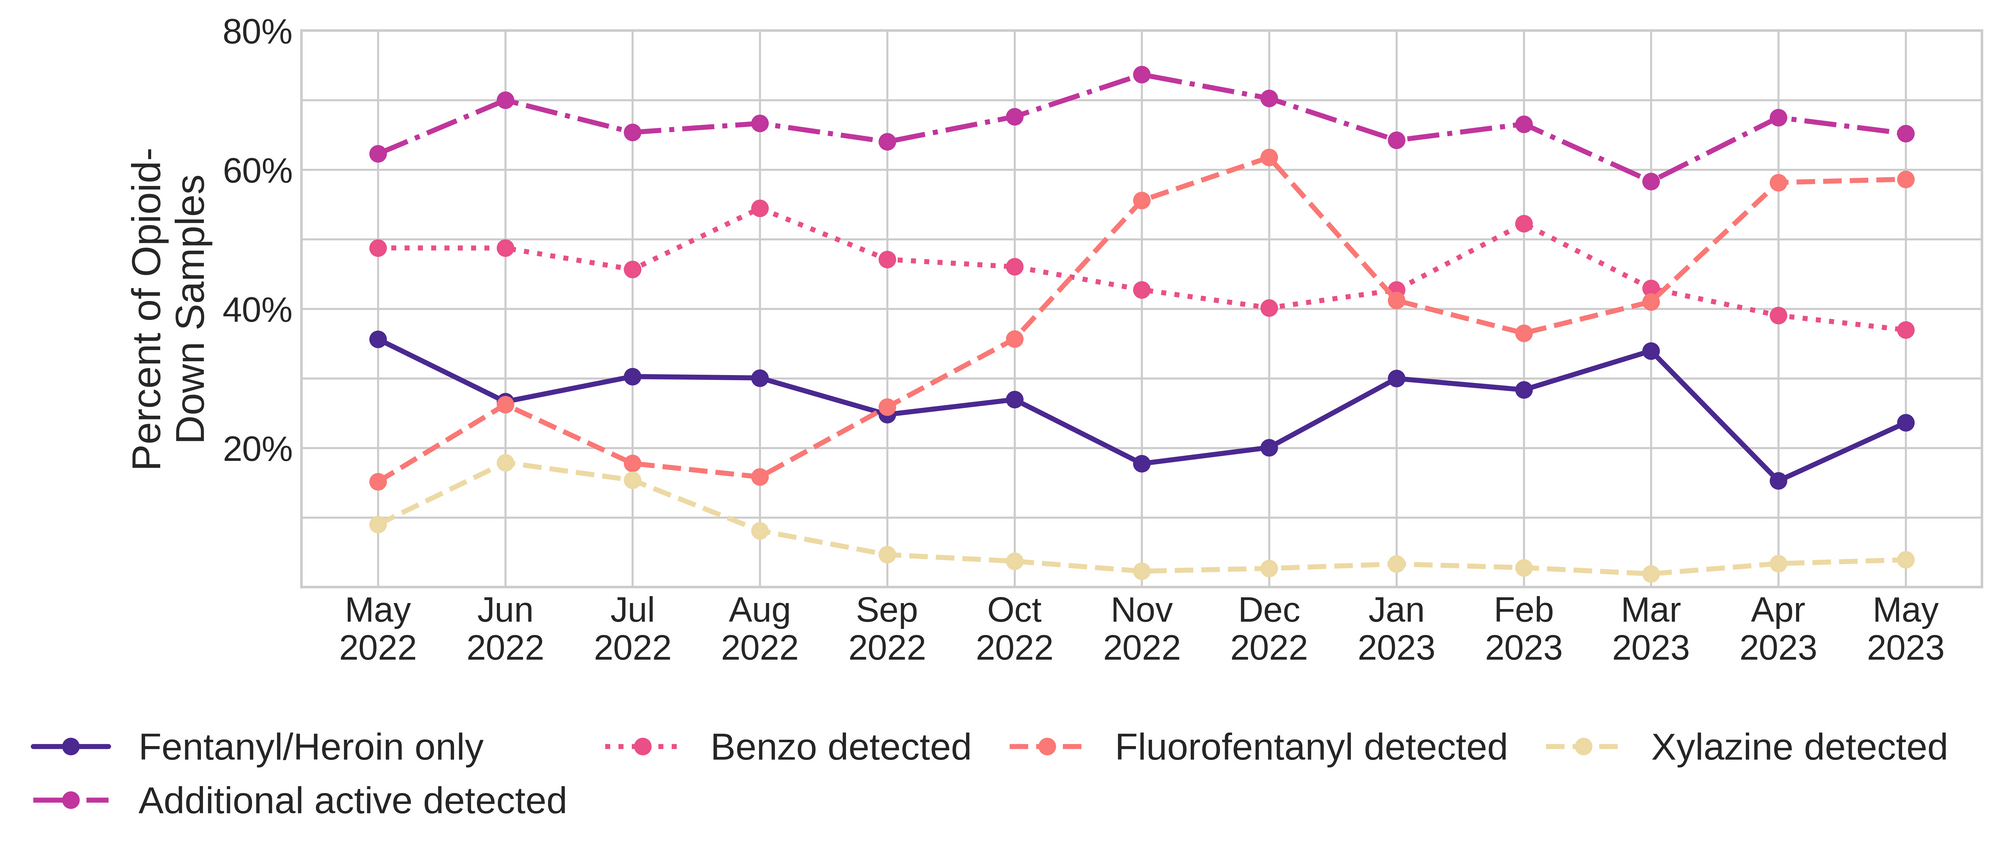 Figure 3. The percentage of expected opioid-down samples checked between May 2022 and May 2023 that only contained fentanyl/heroin actives (solid dark purple), opioid-down samples with an additional active detected (dot-dashed magenta), opioid-down samples that contained a benzodiazepine-related drug (dotted pink), opioid-down samples that contained fluorofentanyl (dashed salmon), and opioid-down samples that contained xylazine (dashed yellow).